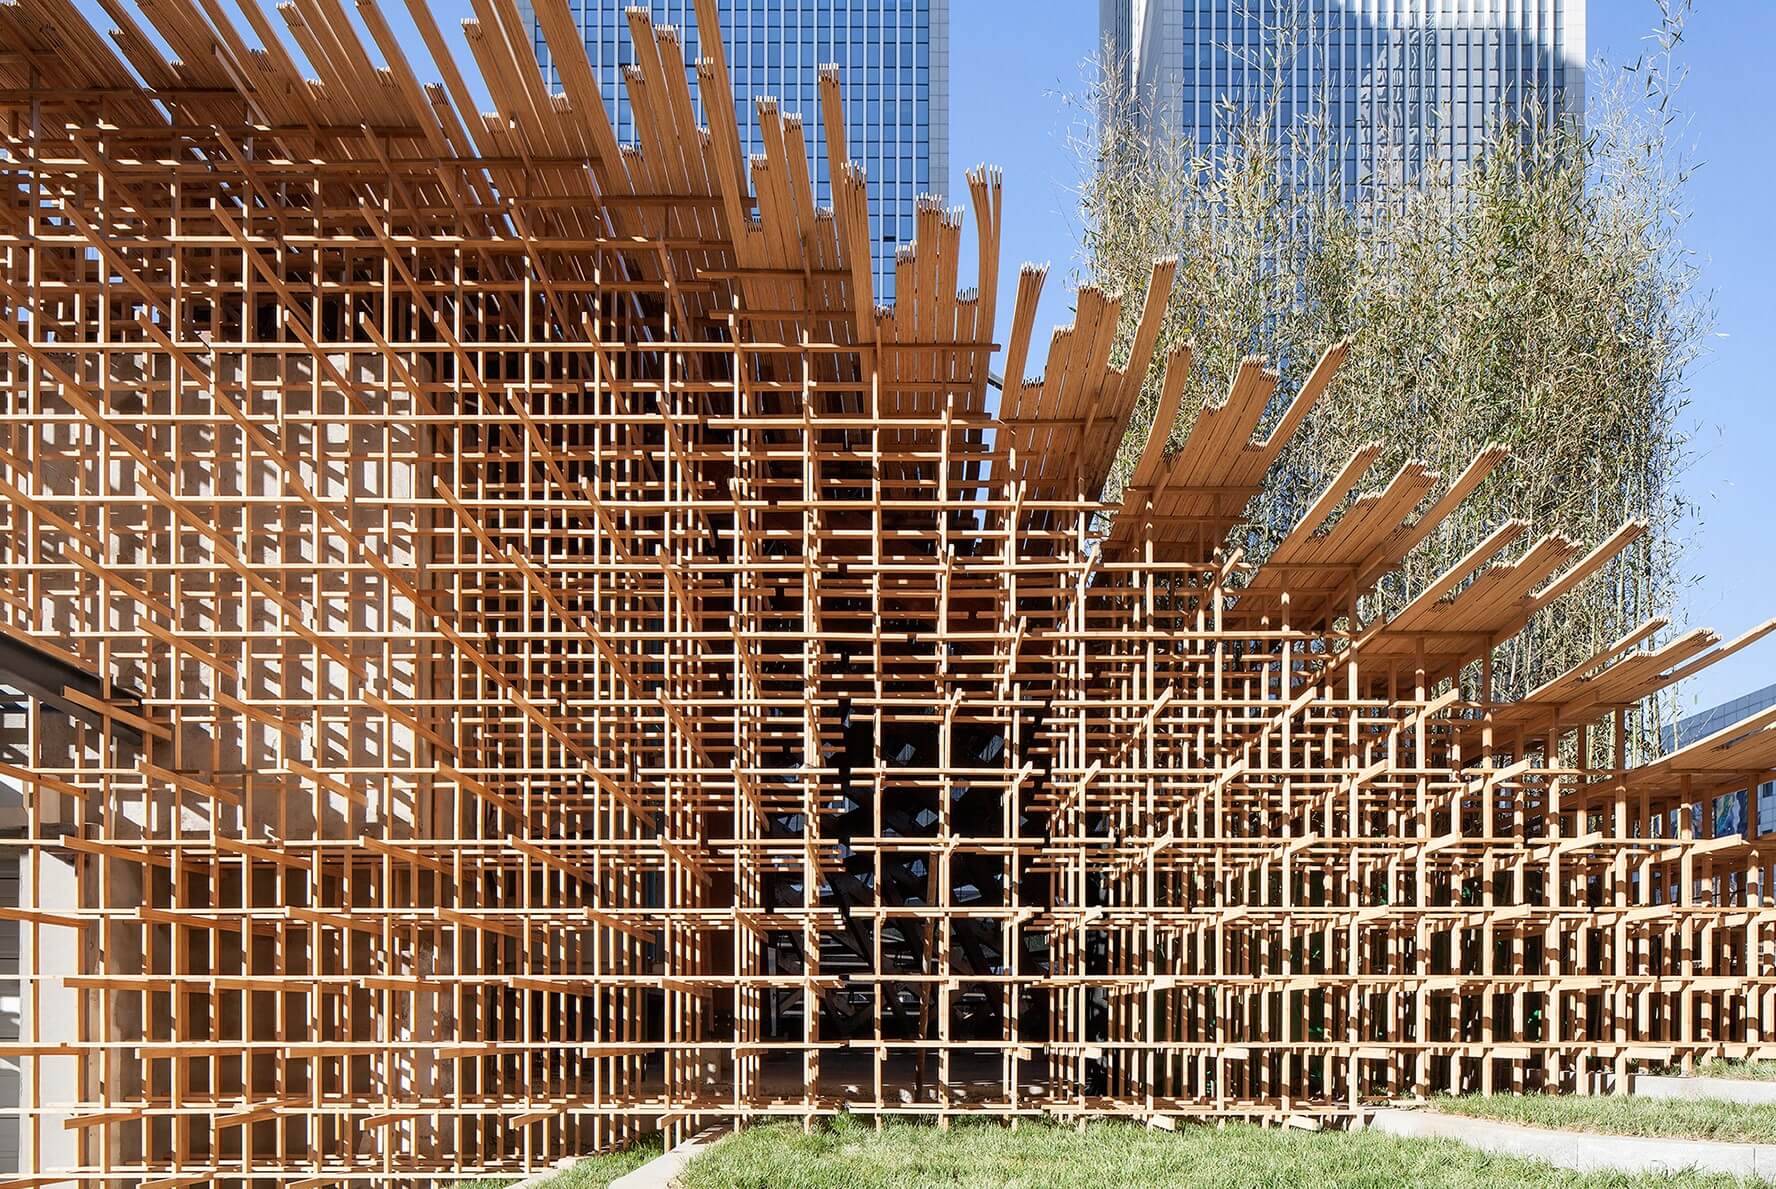 Stepped wooden landscape design supported on wood structure by Origin Architects